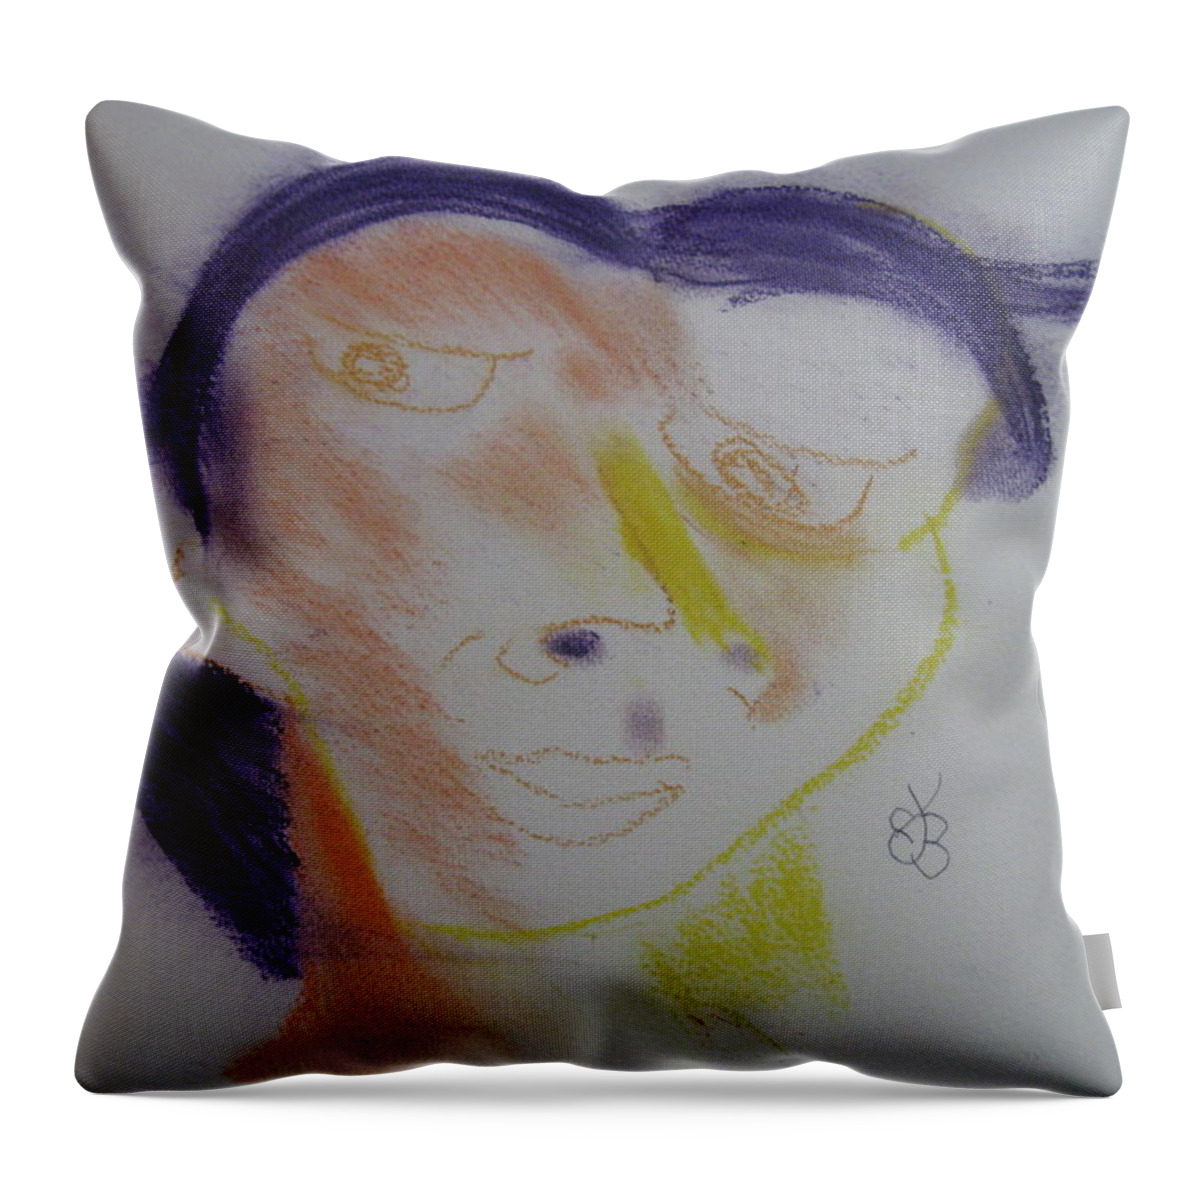  Throw Pillow featuring the drawing Multi coloured face by AJ Brown